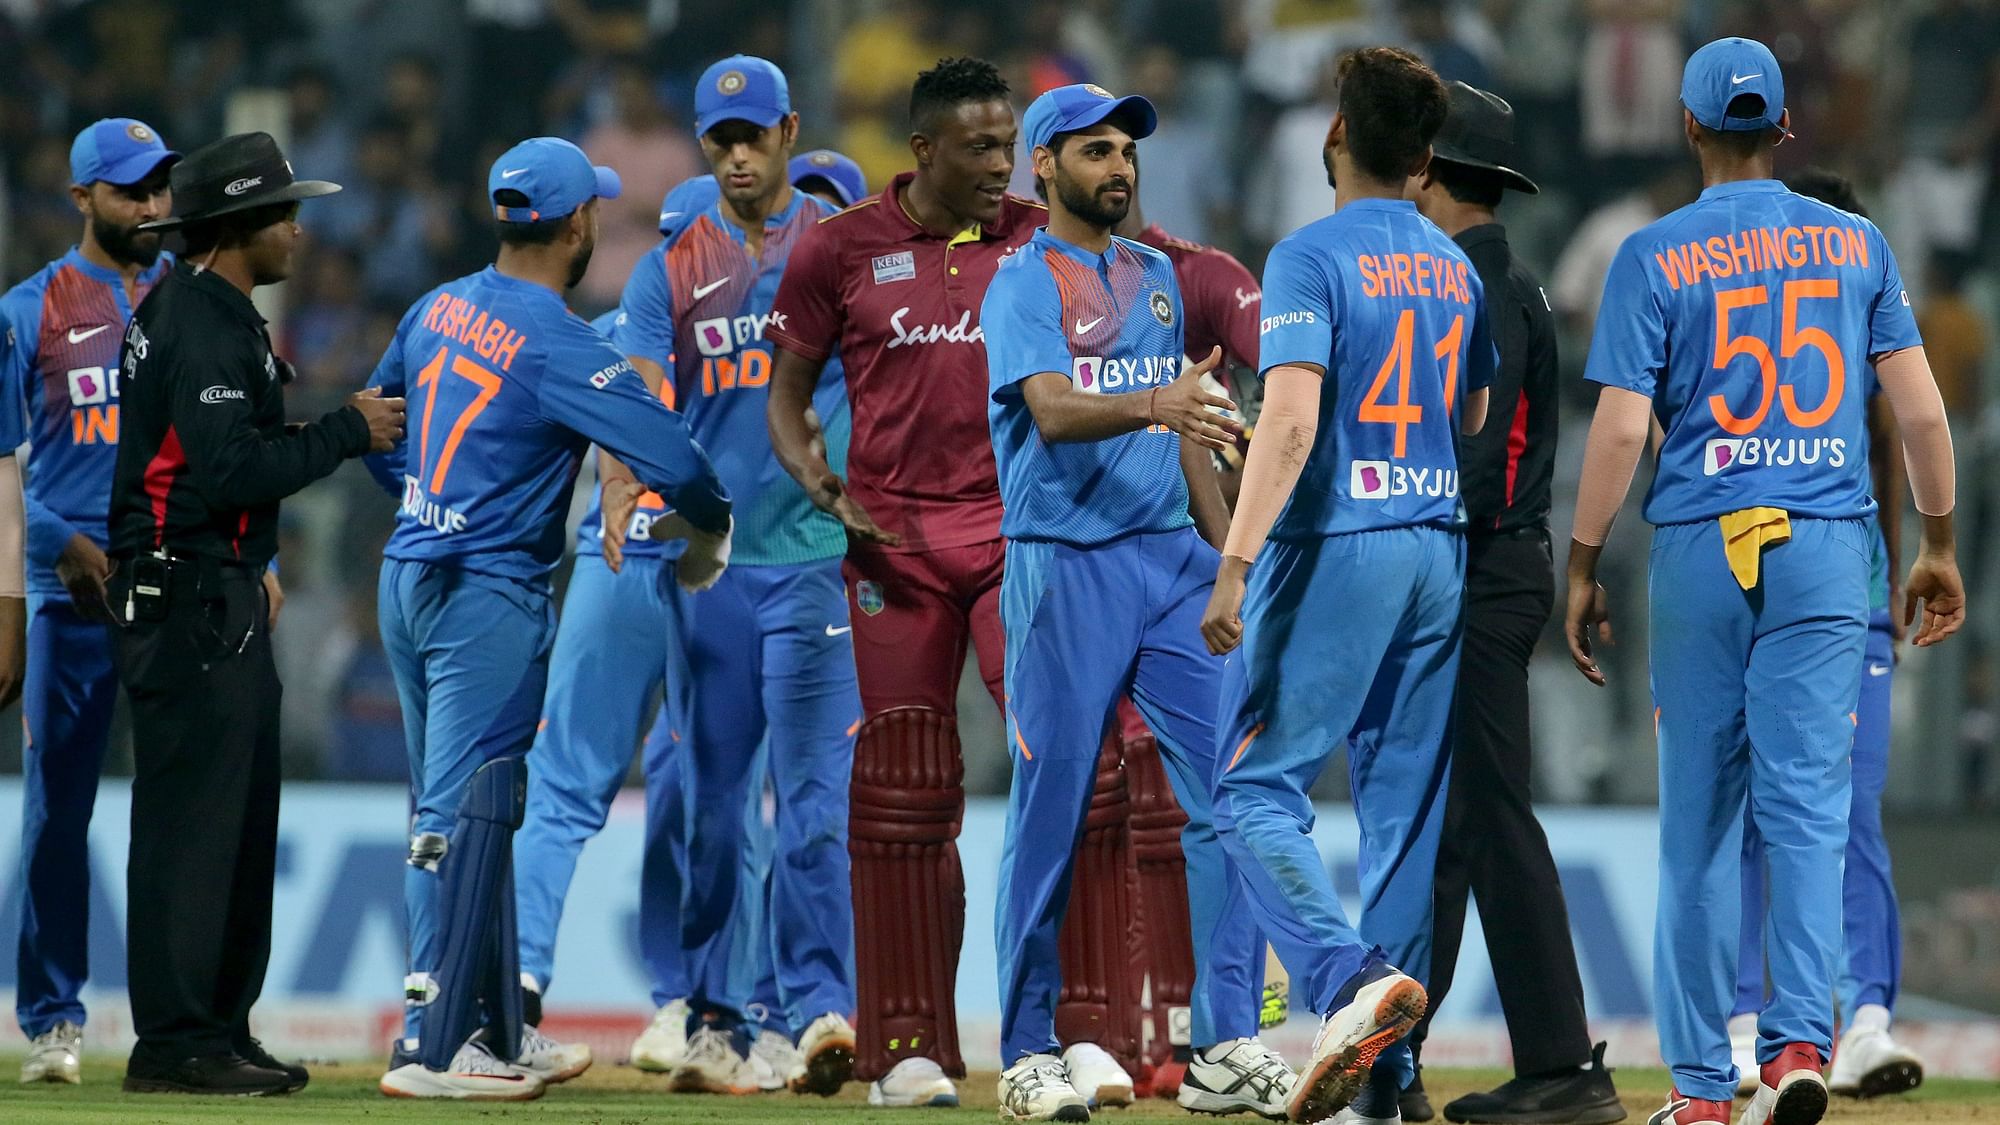 India defeated West Indies in the third T20 to win the series 2-1.